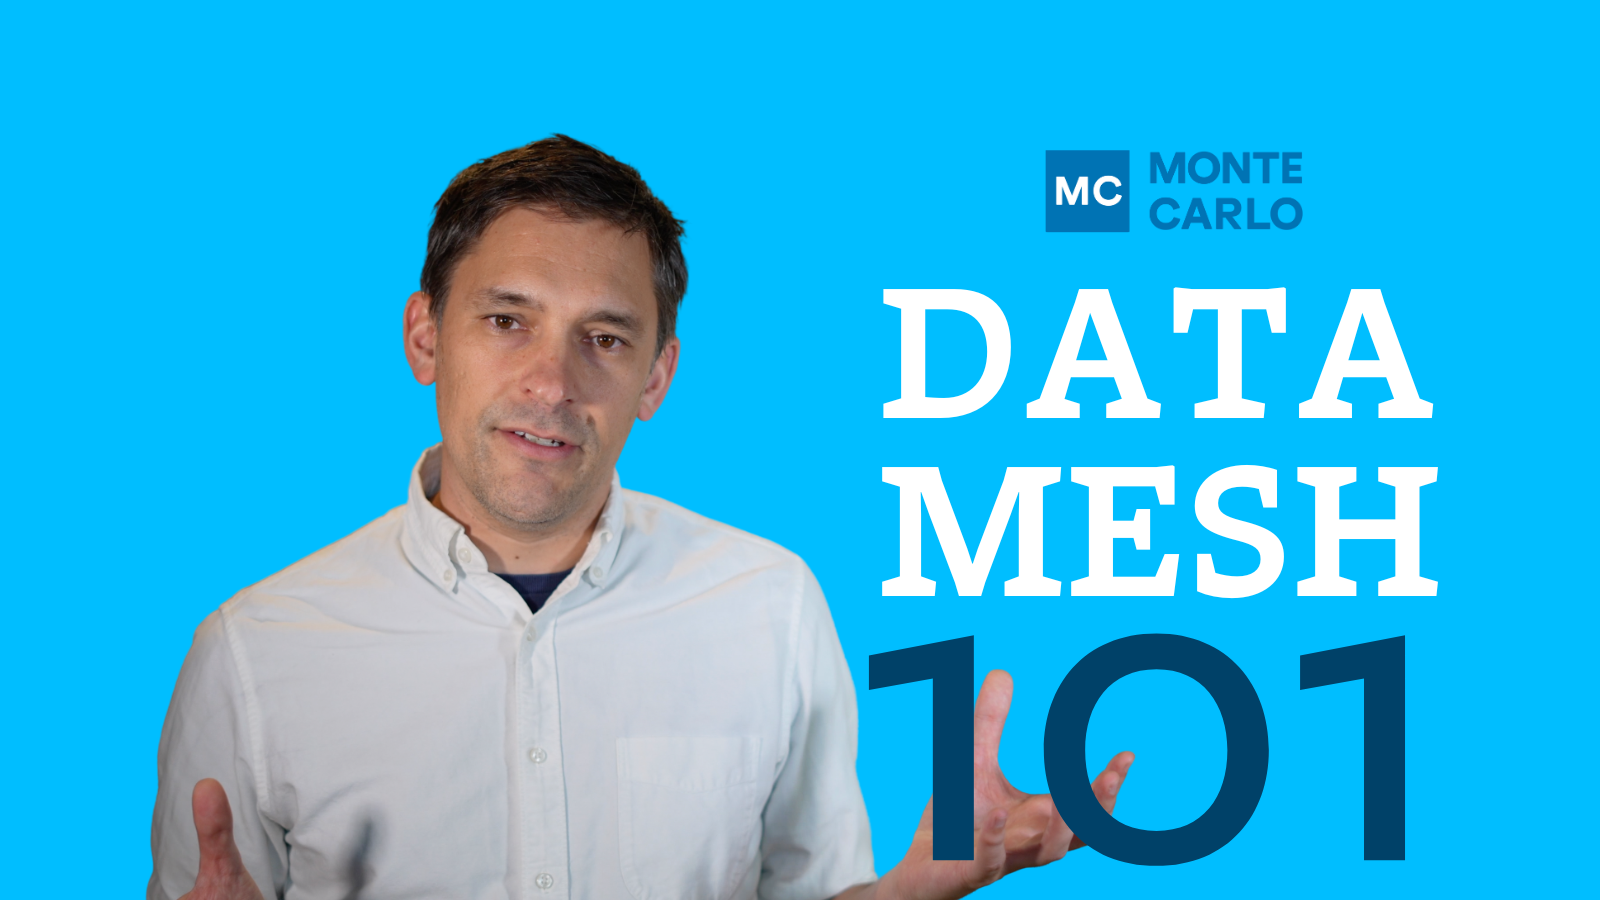 Data Mesh 101: How Not to Mesh It Up